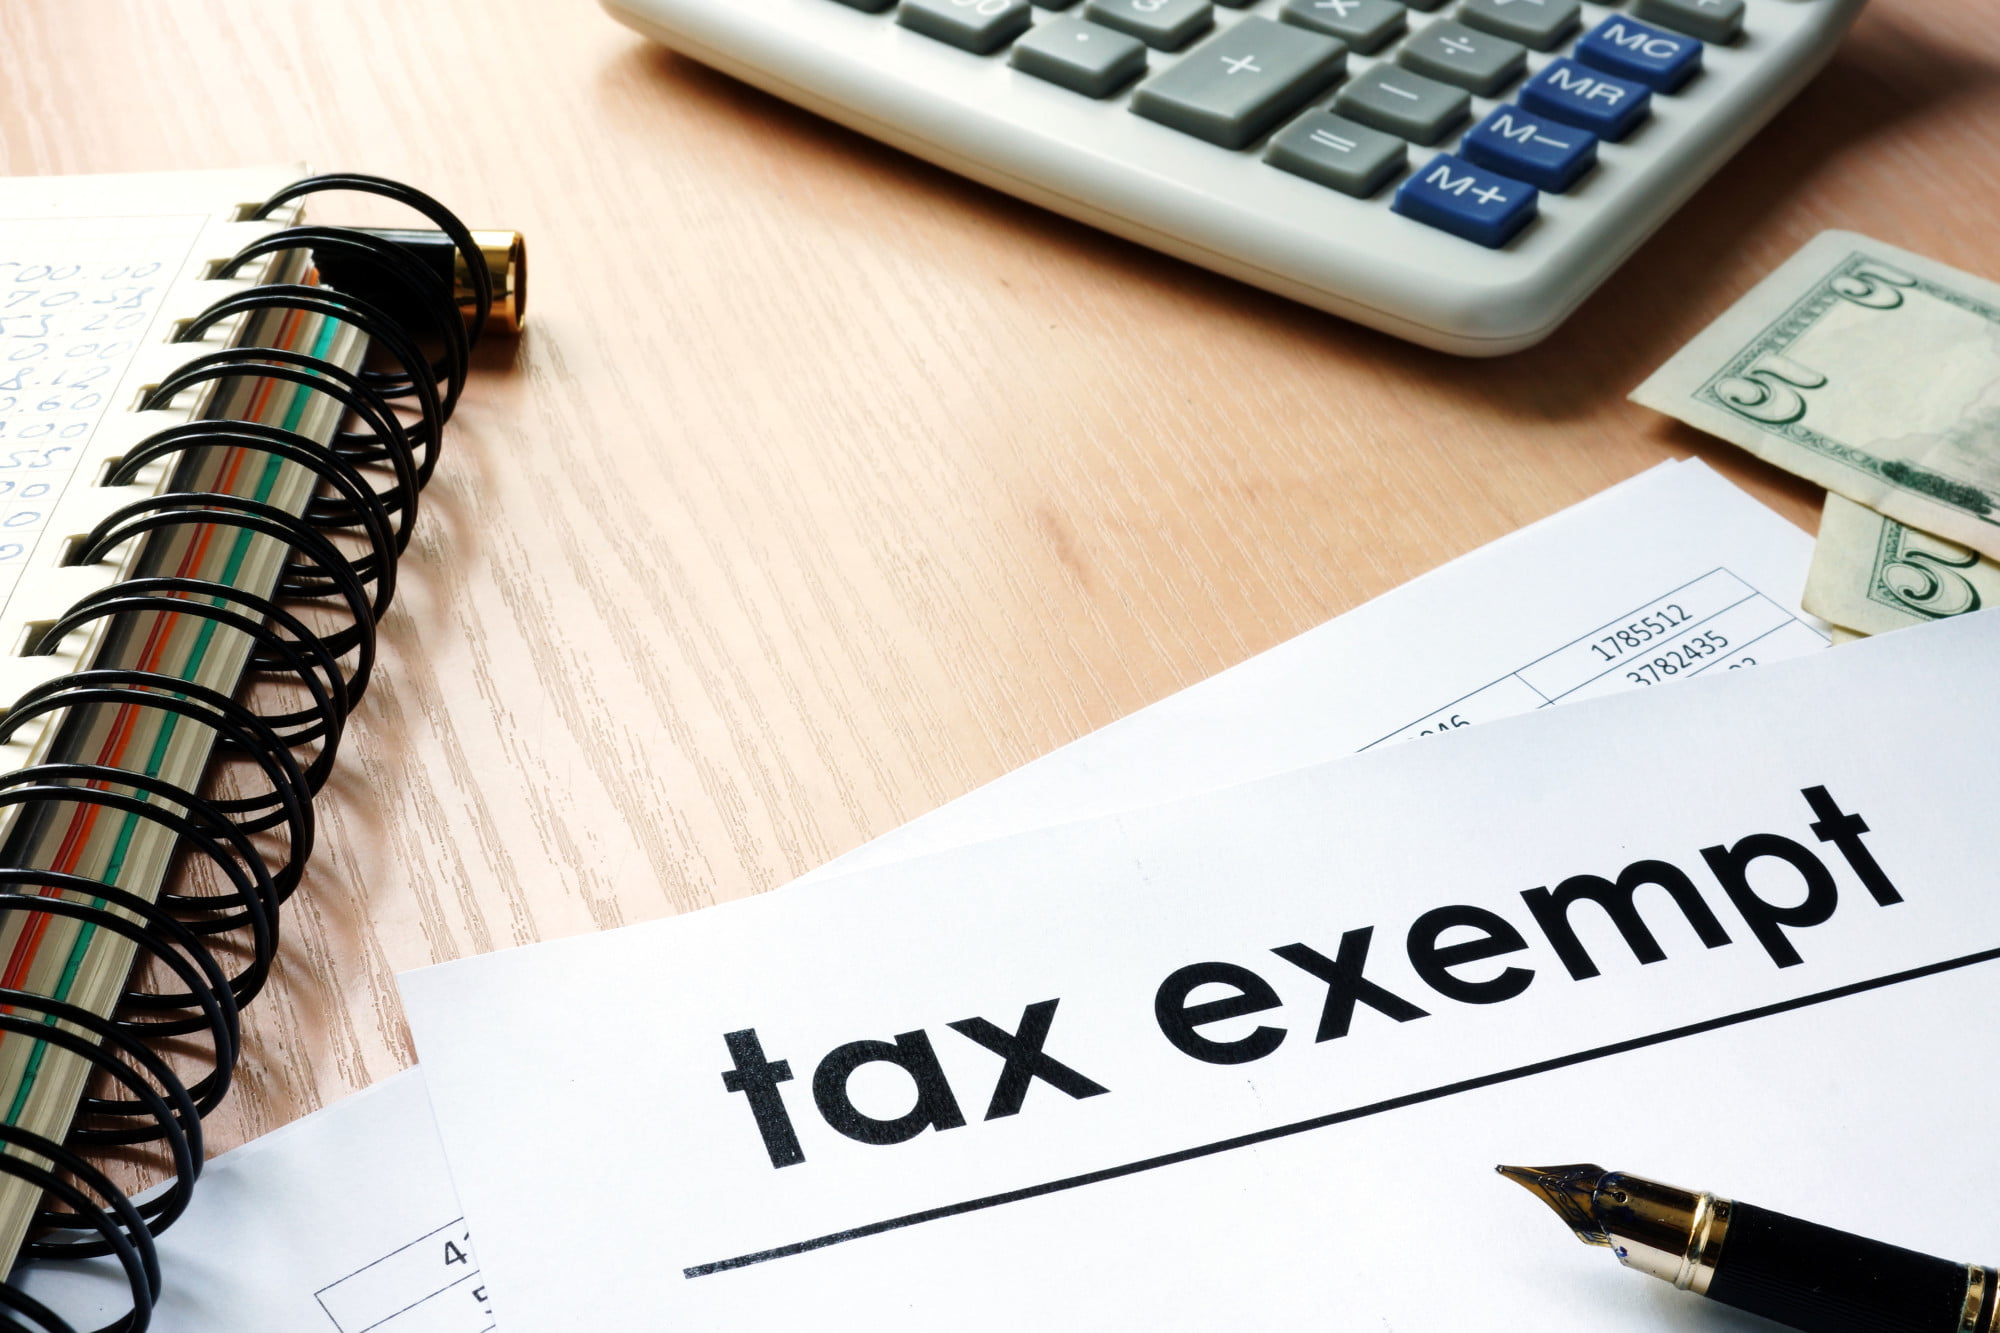 You may wonder whether you're eligible for property tax exemption. This guide discusses the requirements and qualifications.